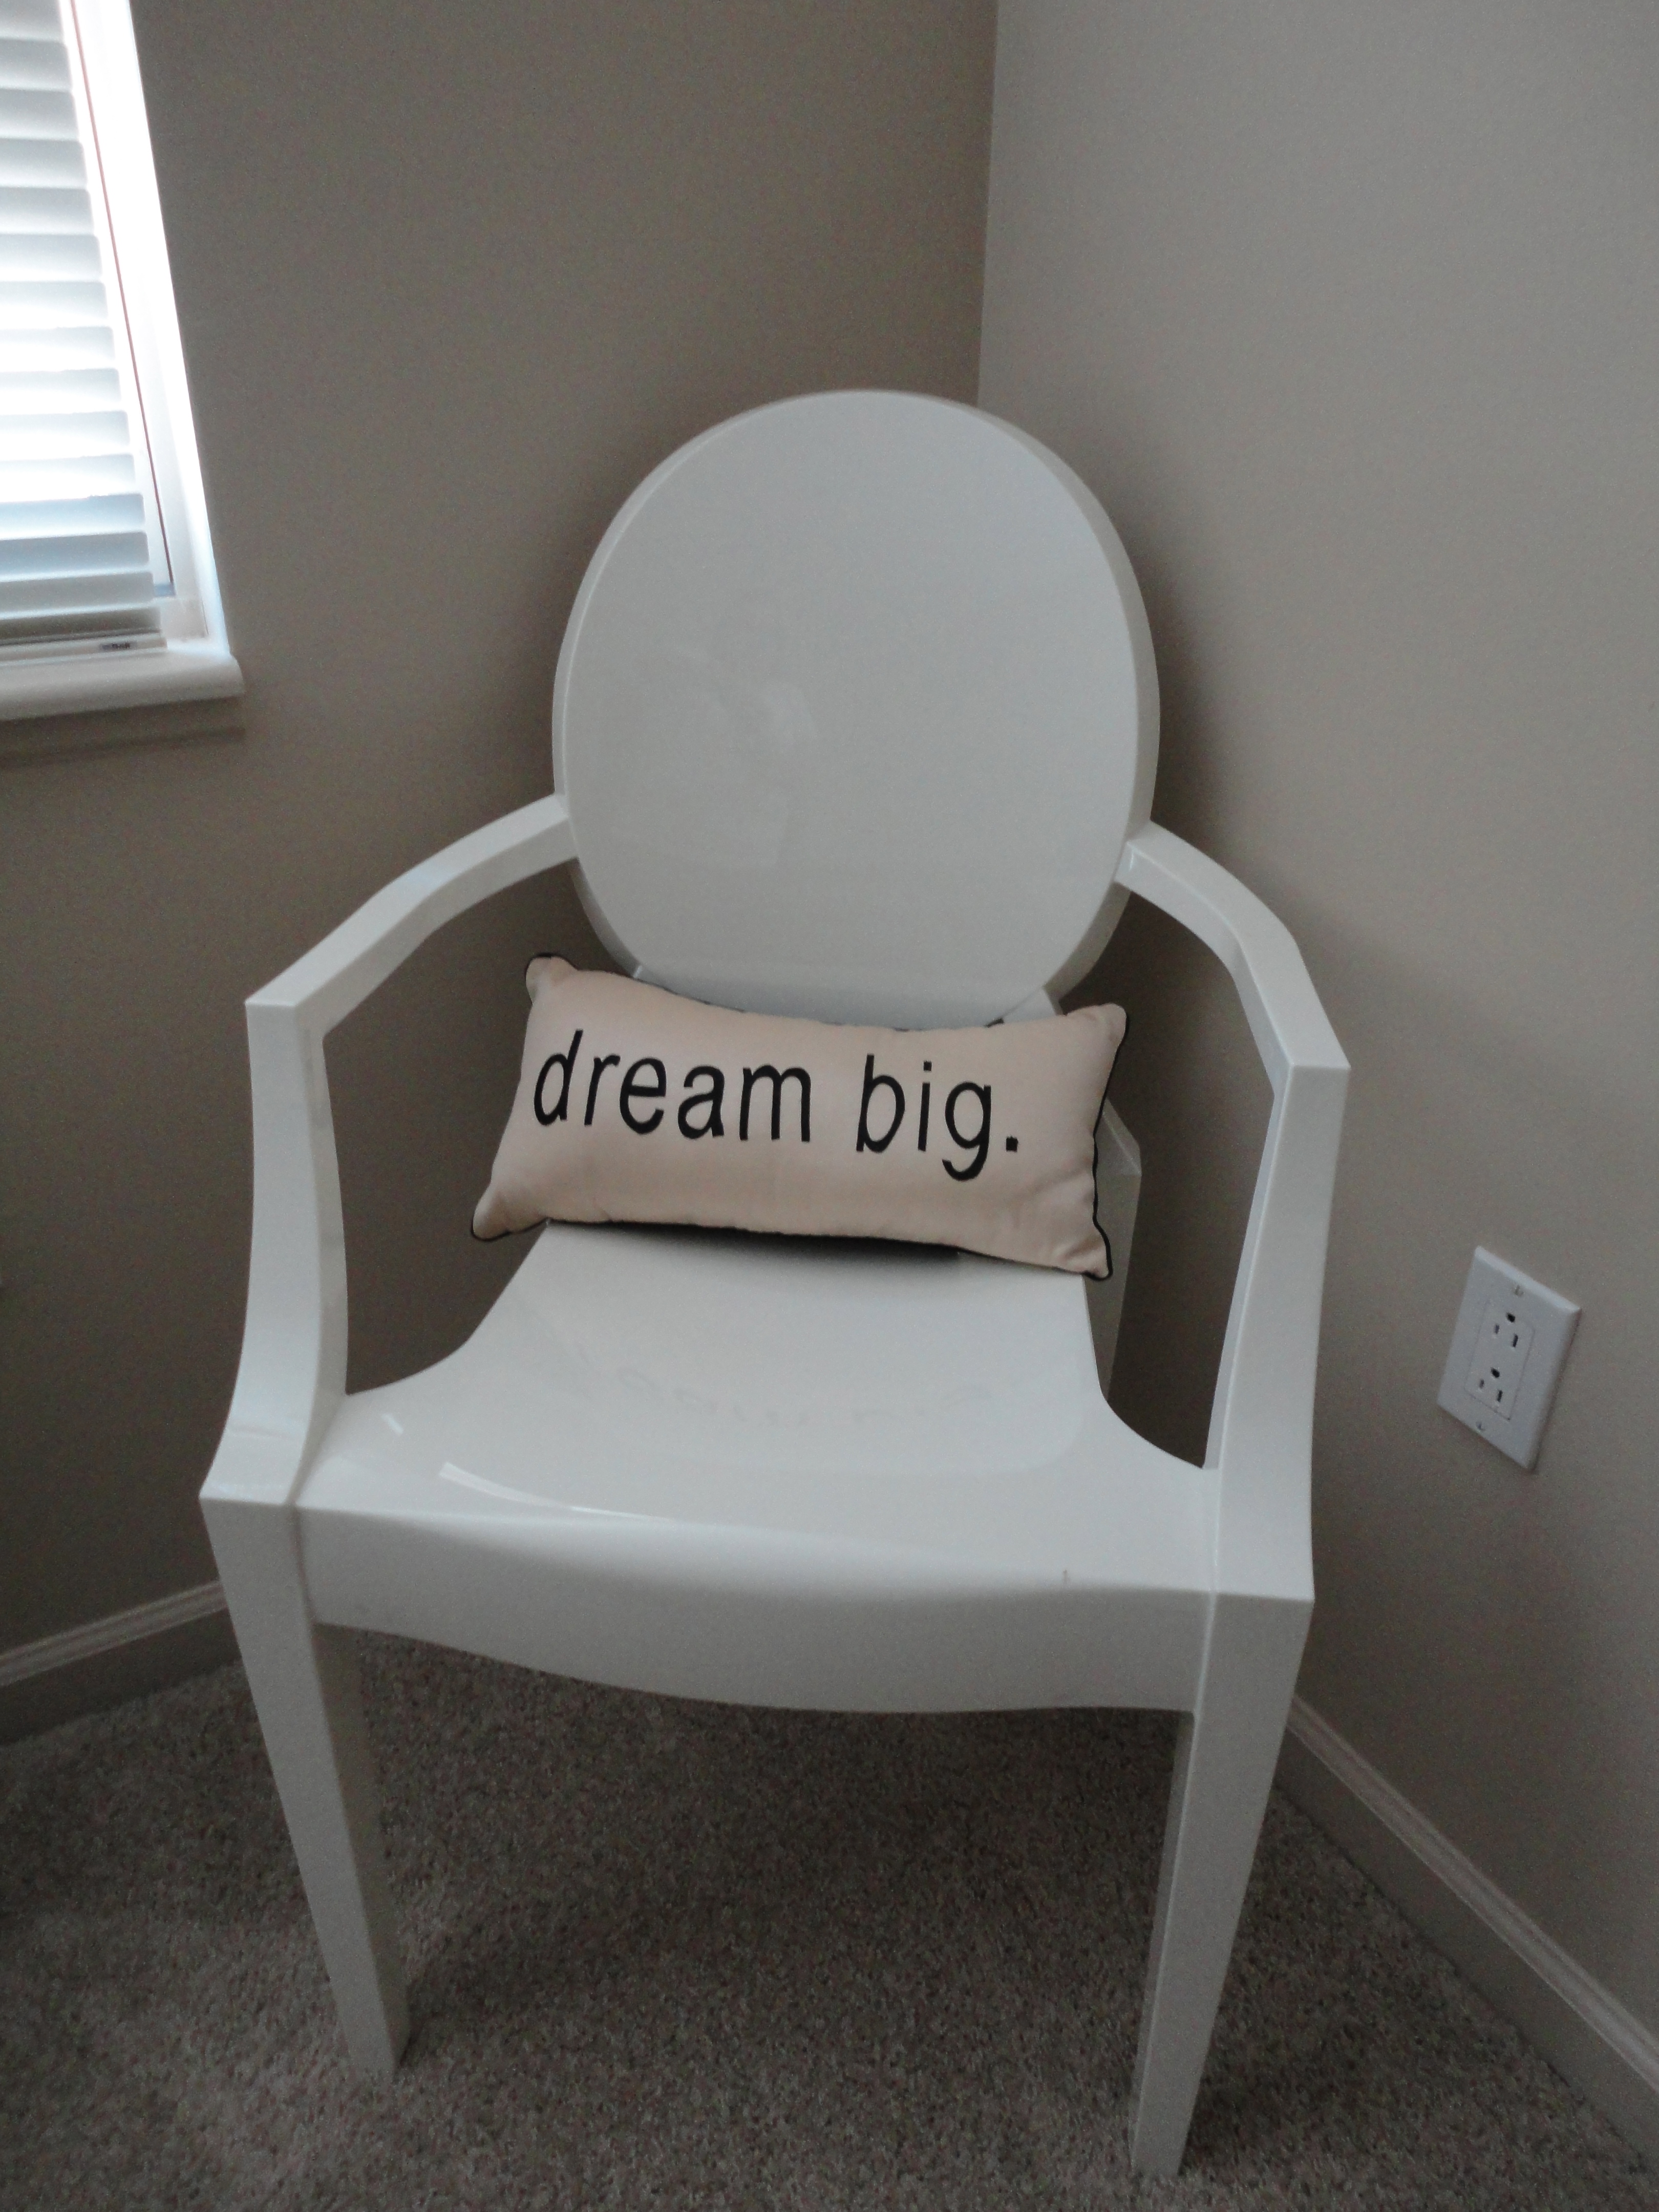 dream big pillow on a chair in the corner of a bedroom